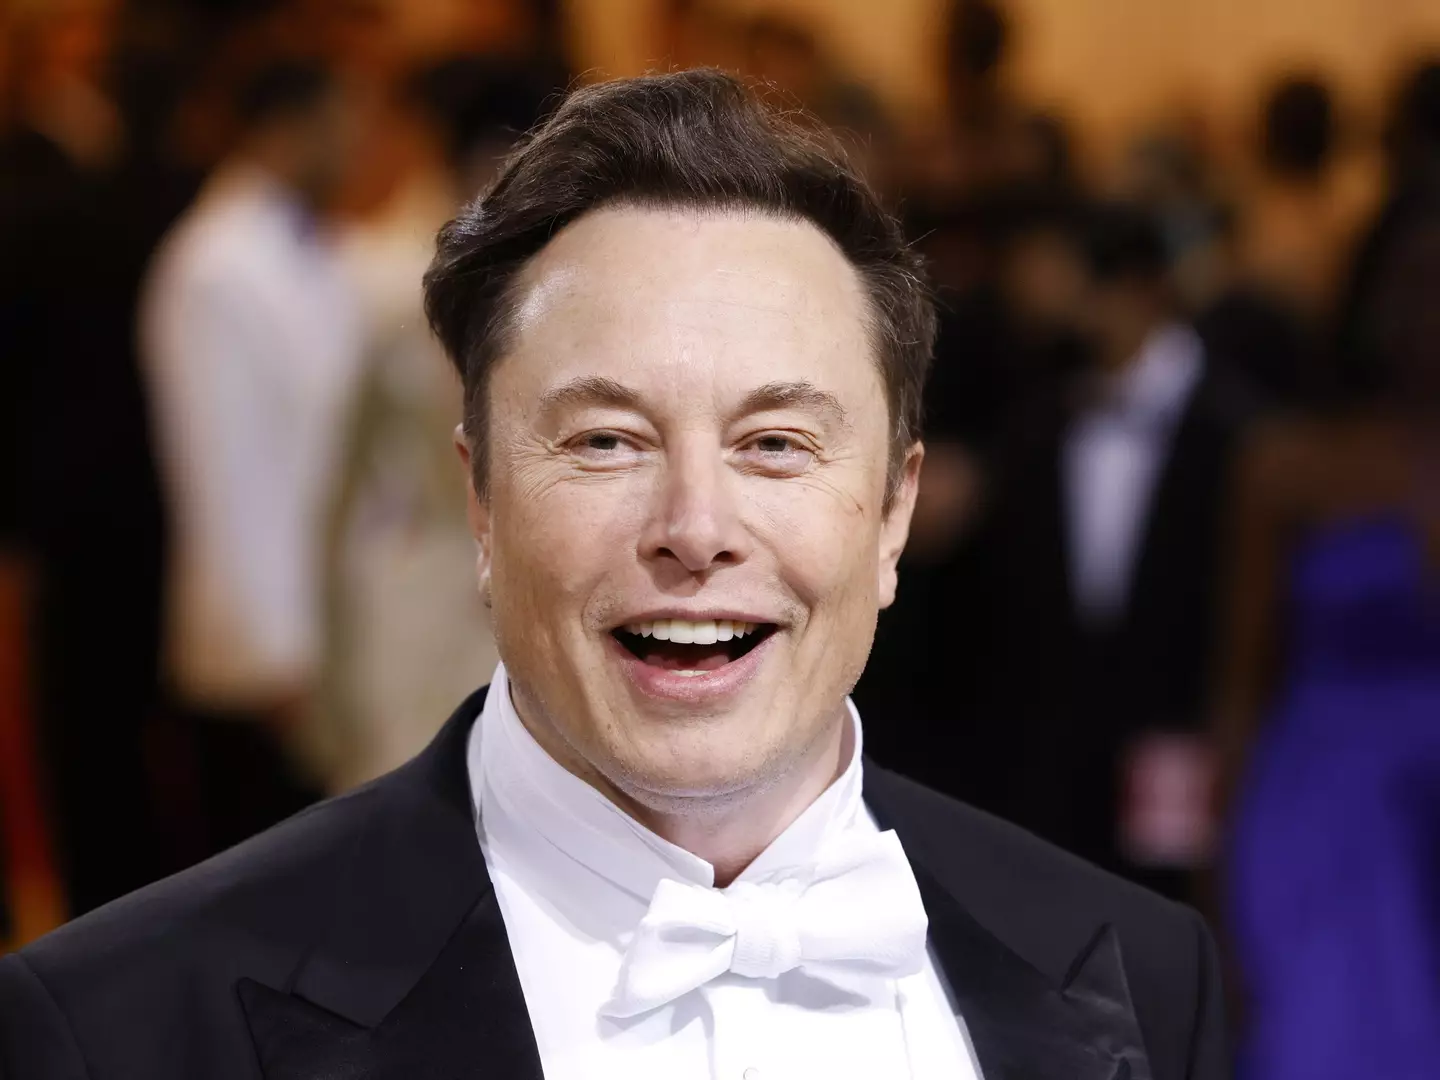 Elon Musk attended the Met Gala with his mum.